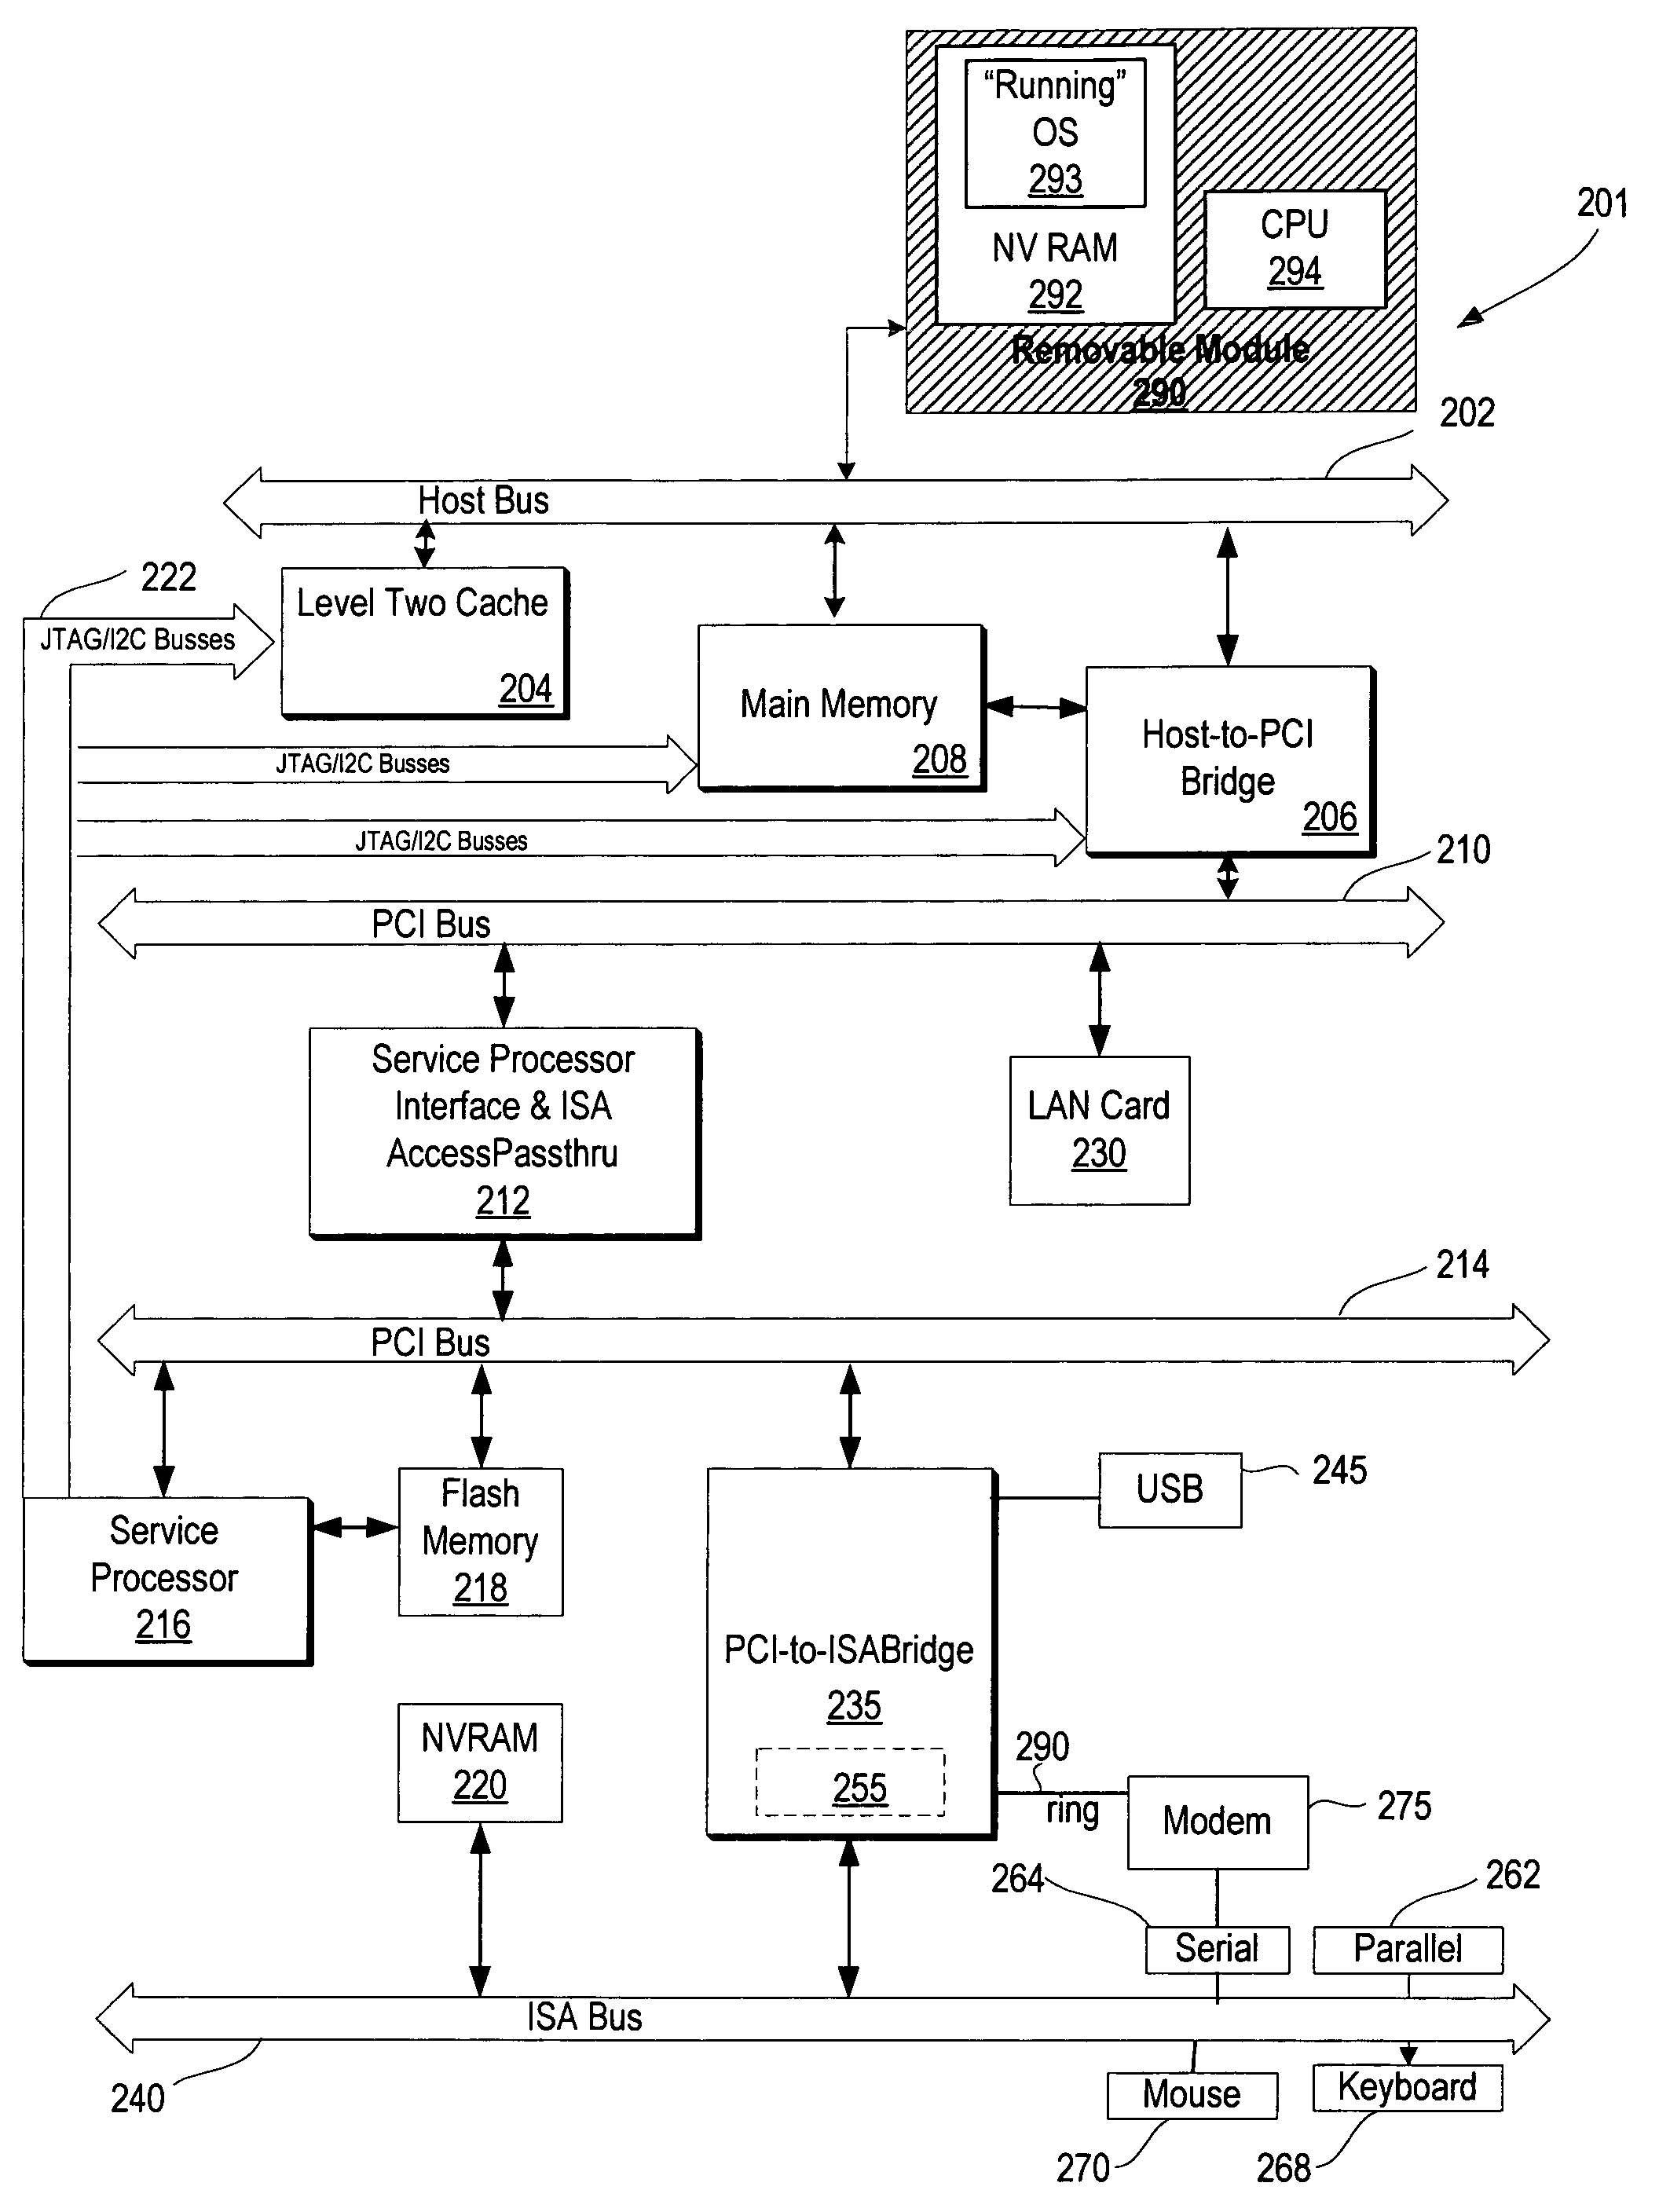 System and method for loading, executing, and adapting a portable running operation system from a removable module to multiple computer systems